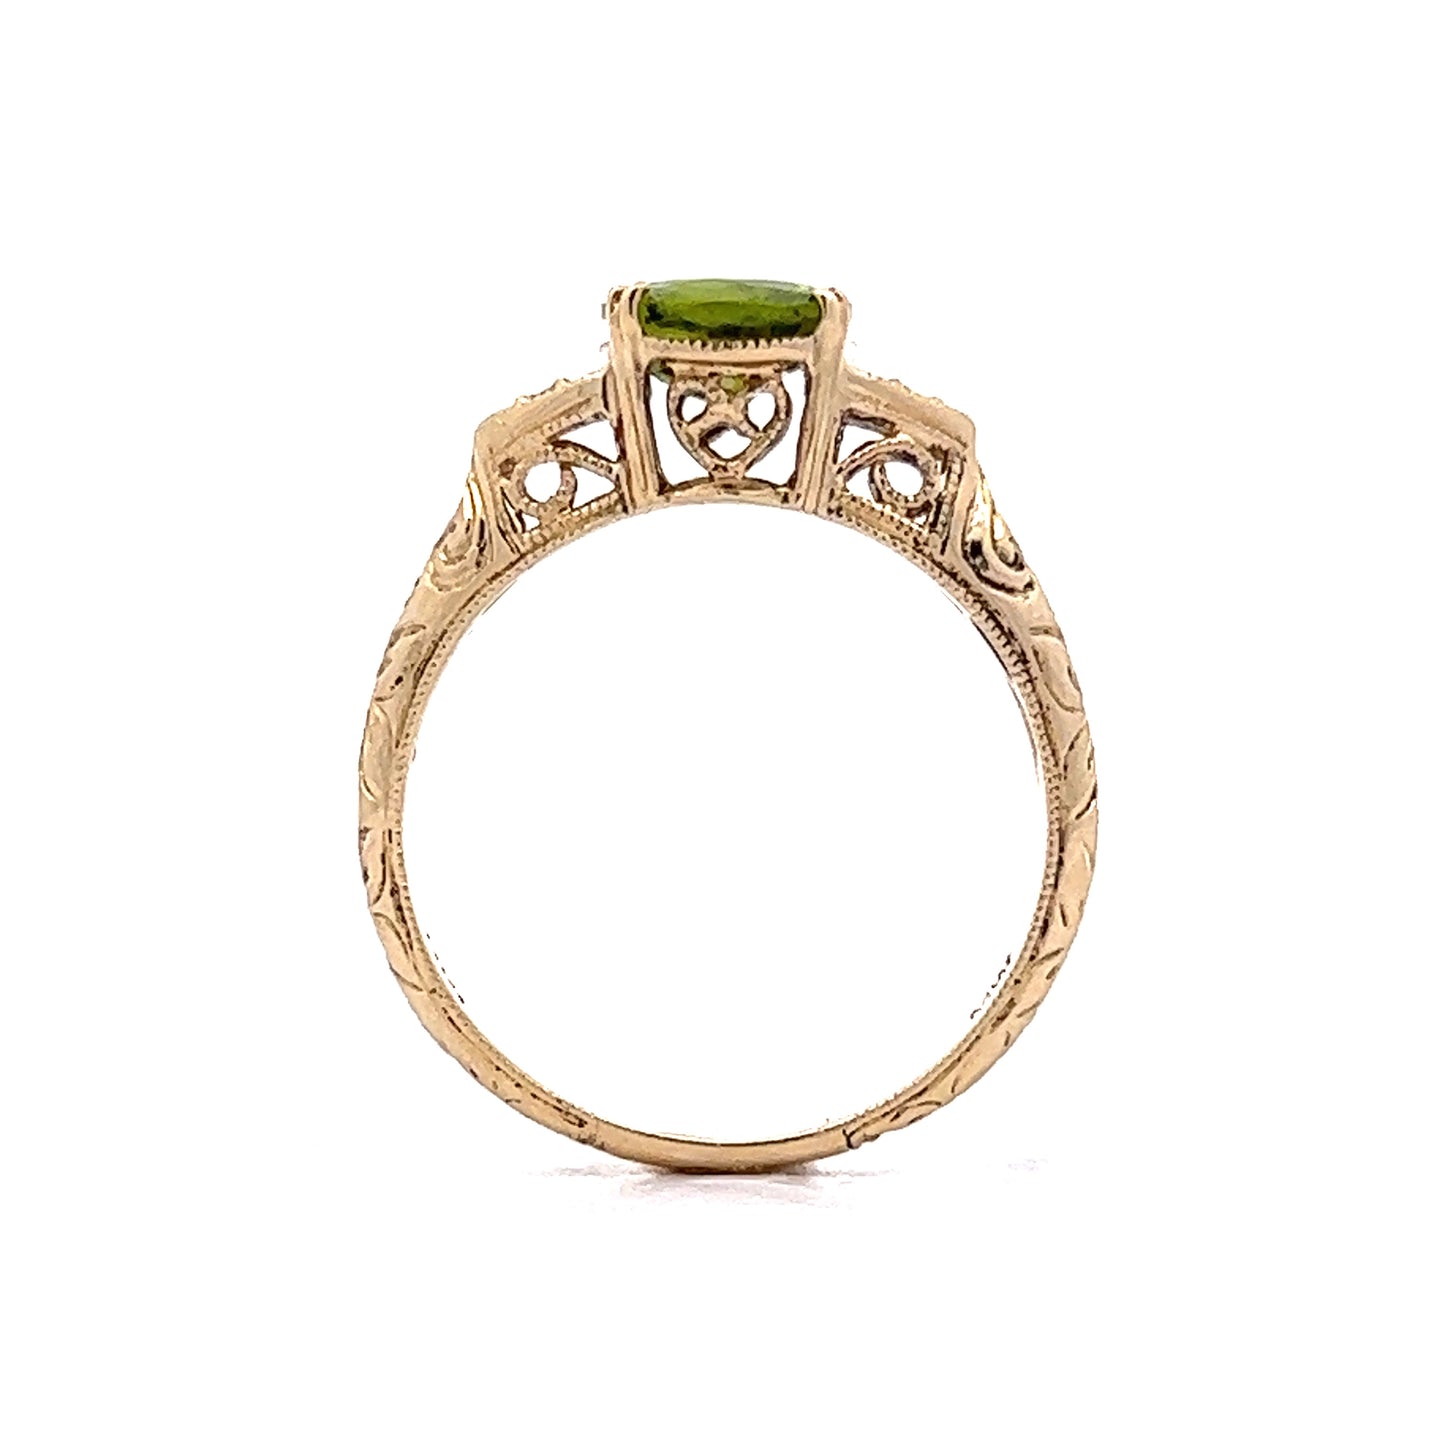 1.37 Oval Peridot Engagement Ring in 14k Yellow Gold